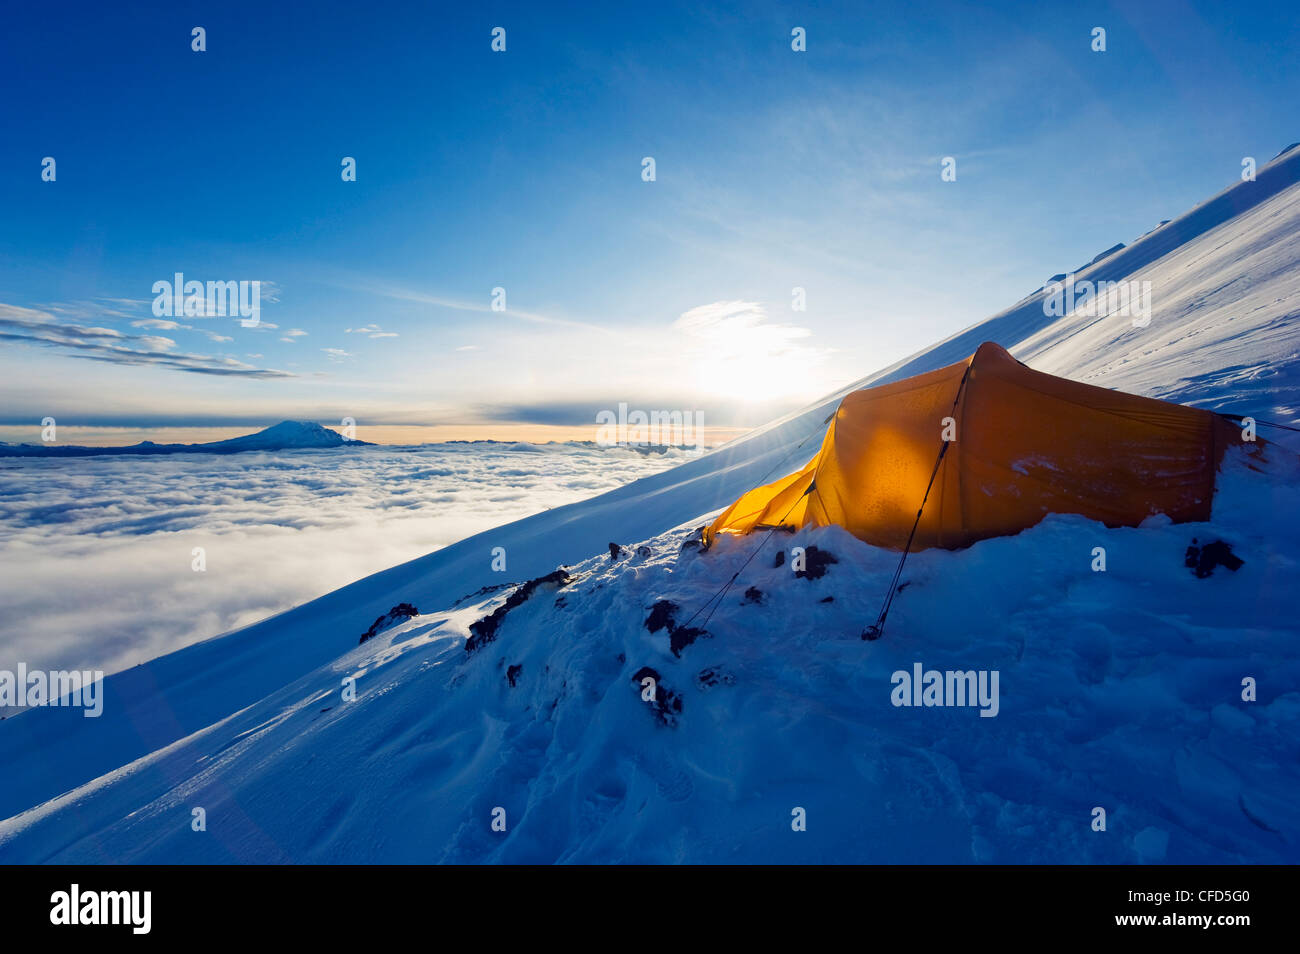 Tent on Volcan Cotopaxi, 5897m, highest active volcano in the world, Ecuador, South America Stock Photo